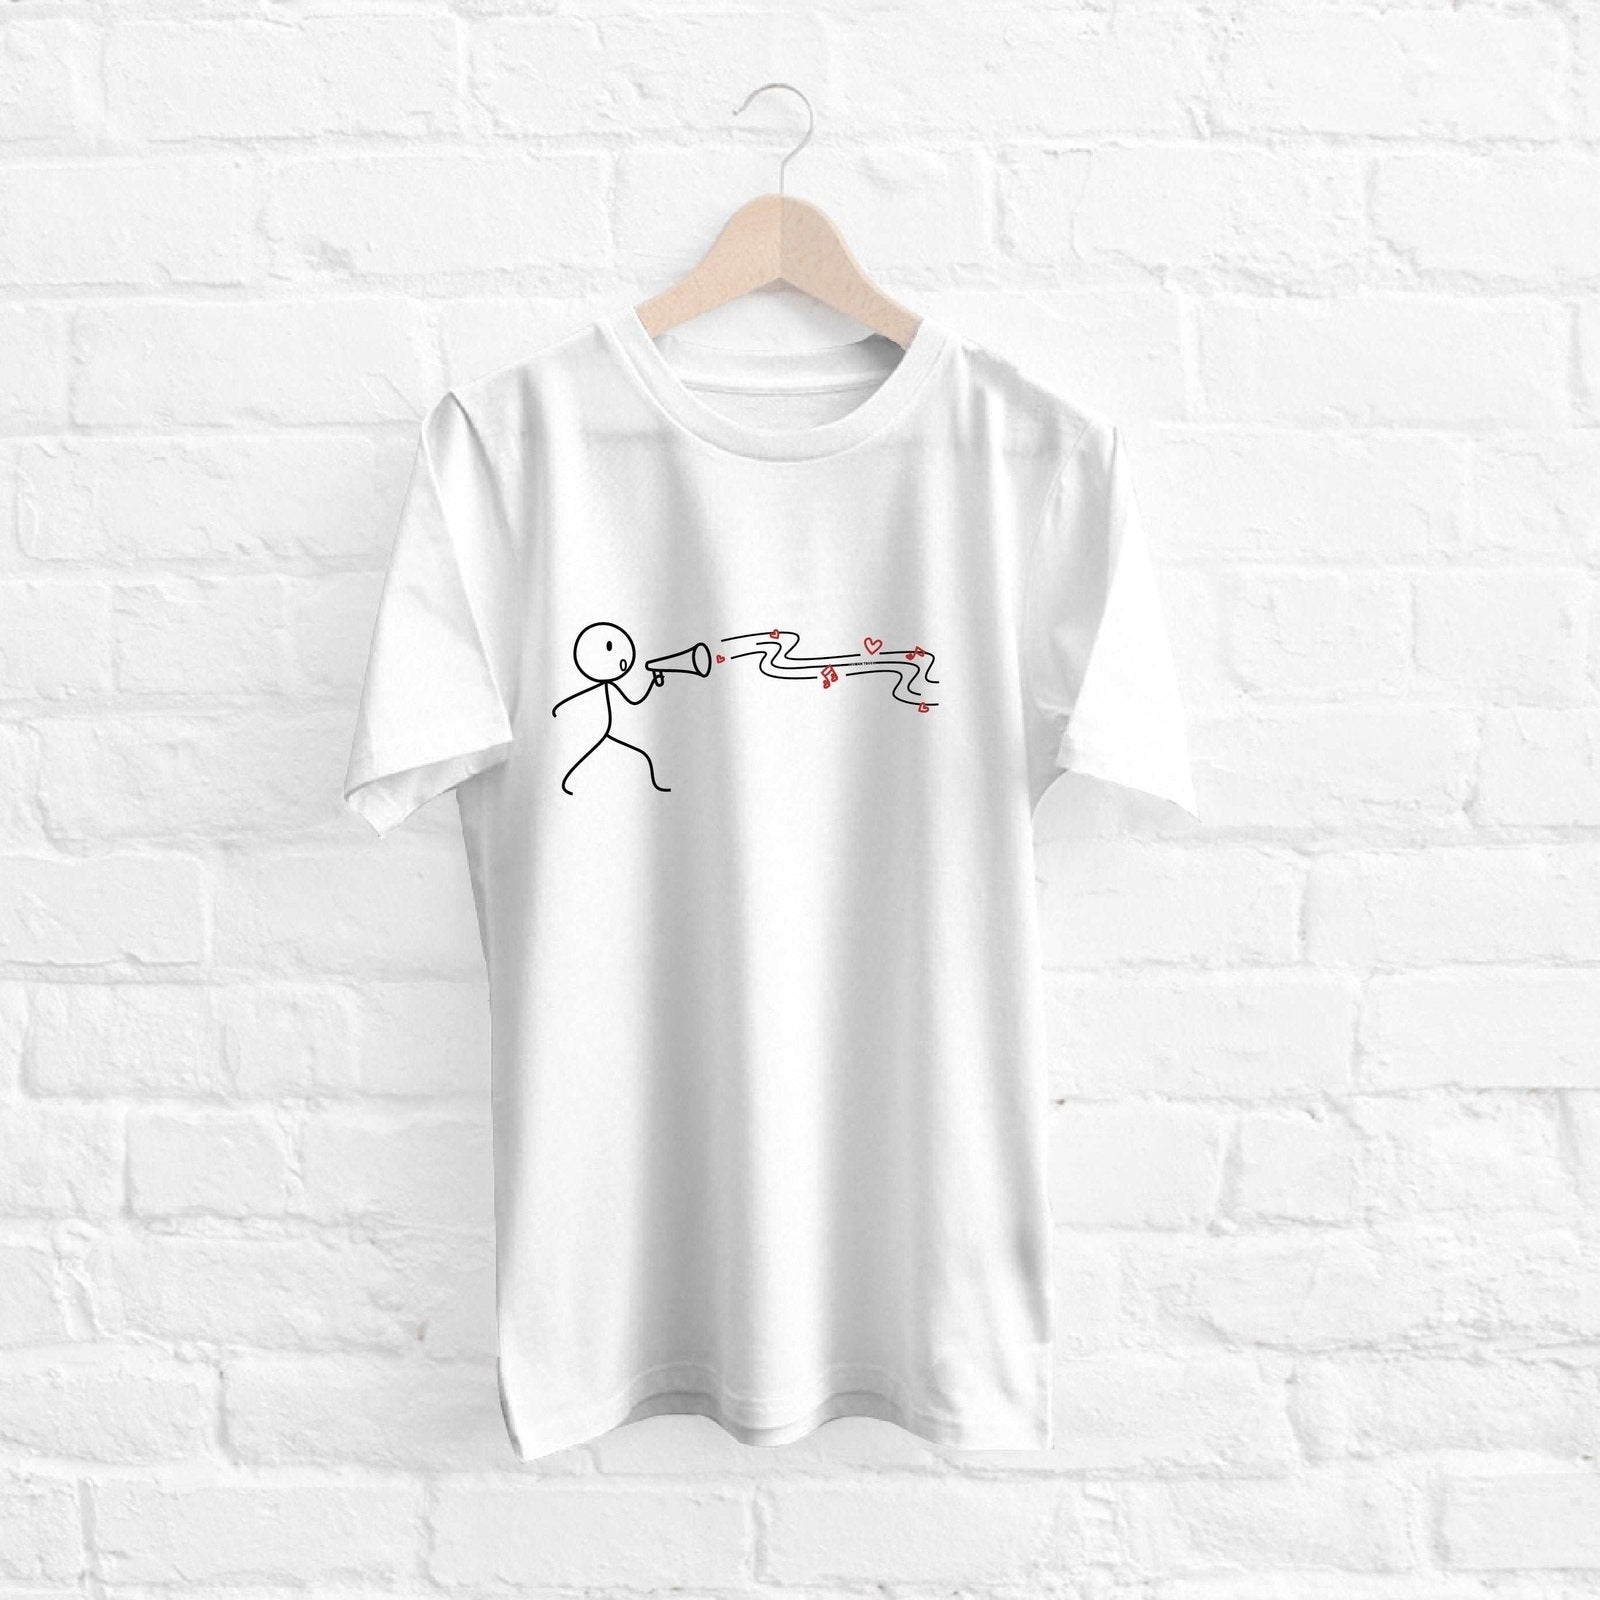 A charming white tee adorned with an adorable hand-drawn design, perfect as a thoughtful gift for couples, anniversaries, or anyone in need of a stylish, unique present.